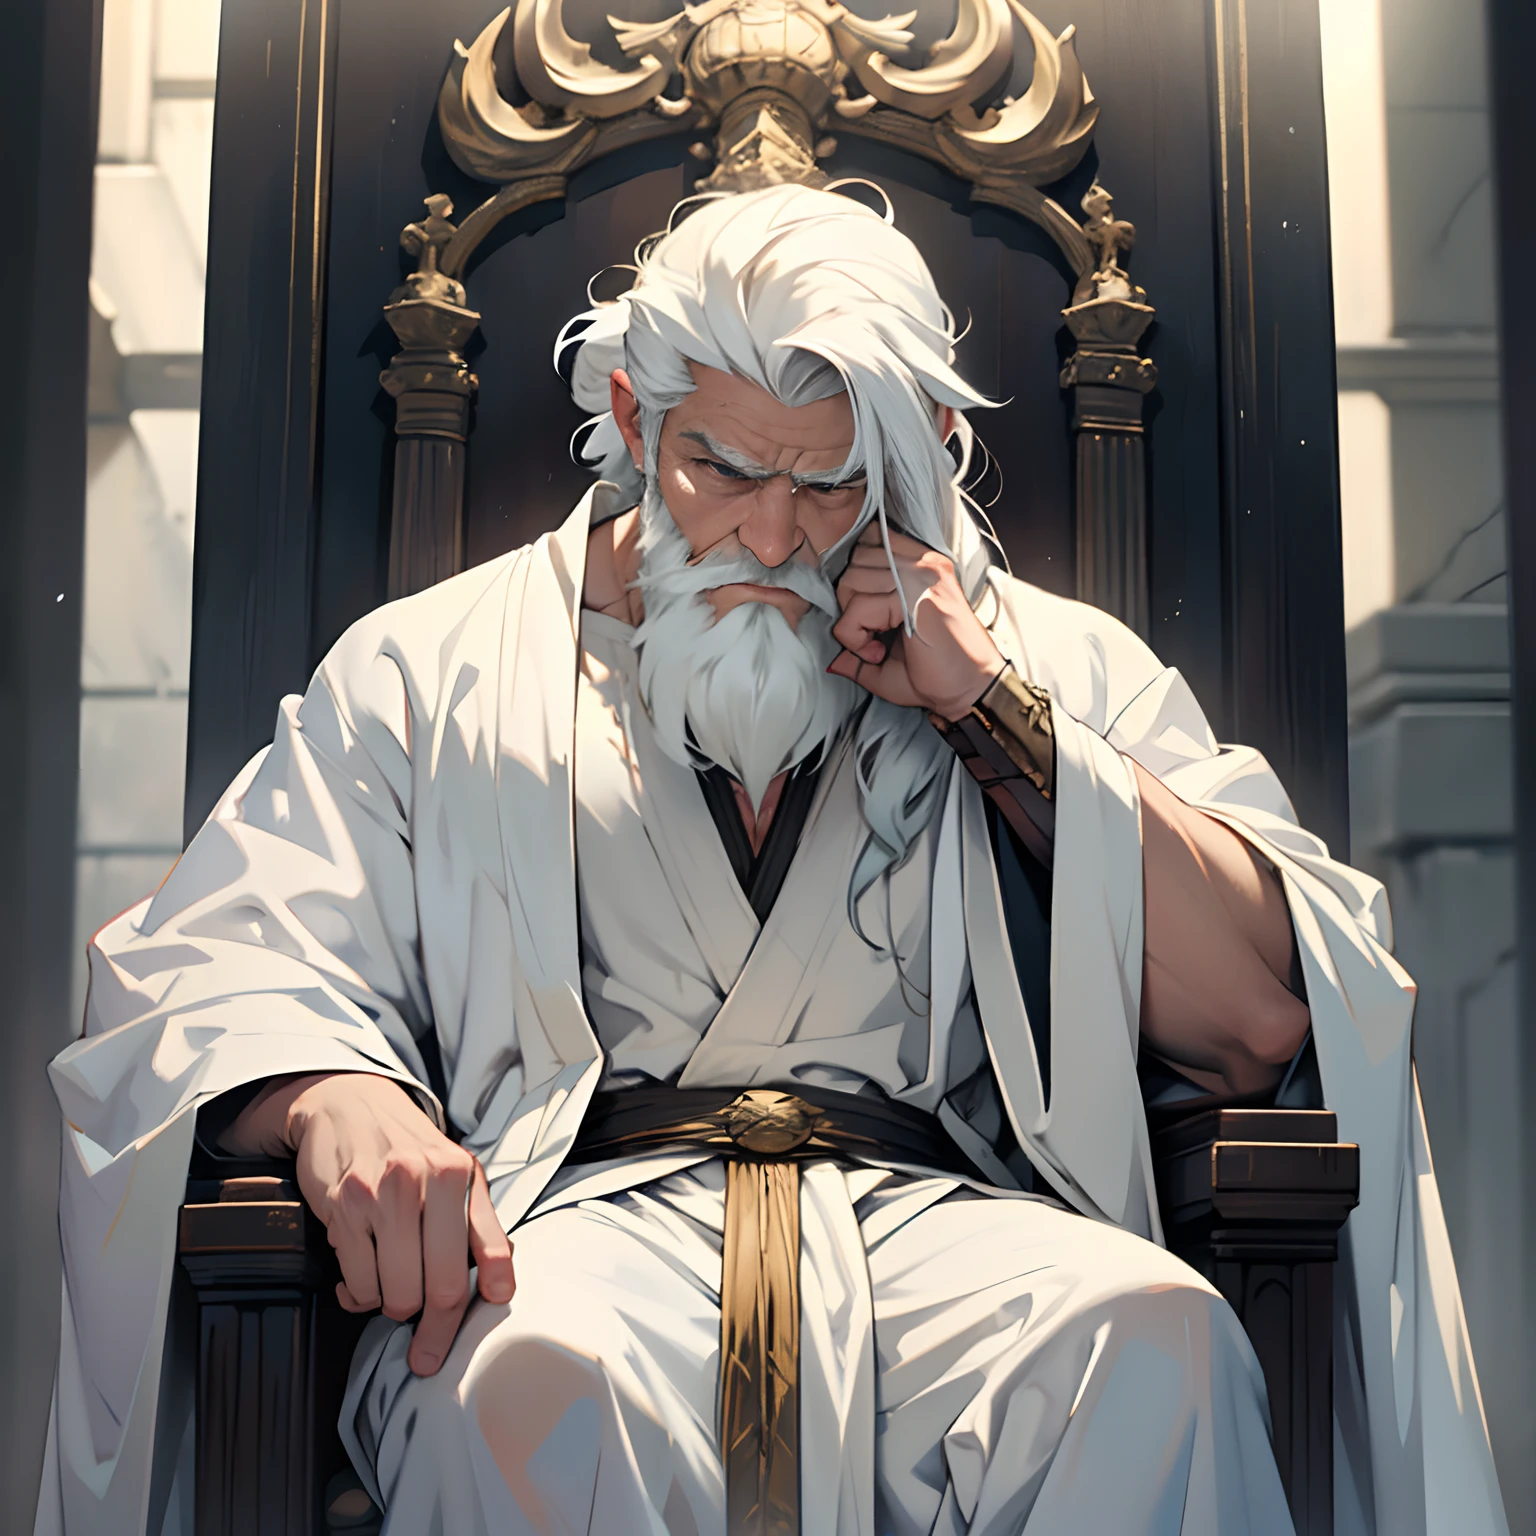 old man with white robe on throne, white beard, sad face, divine, gloomy face, face similiar to chris hemsworth